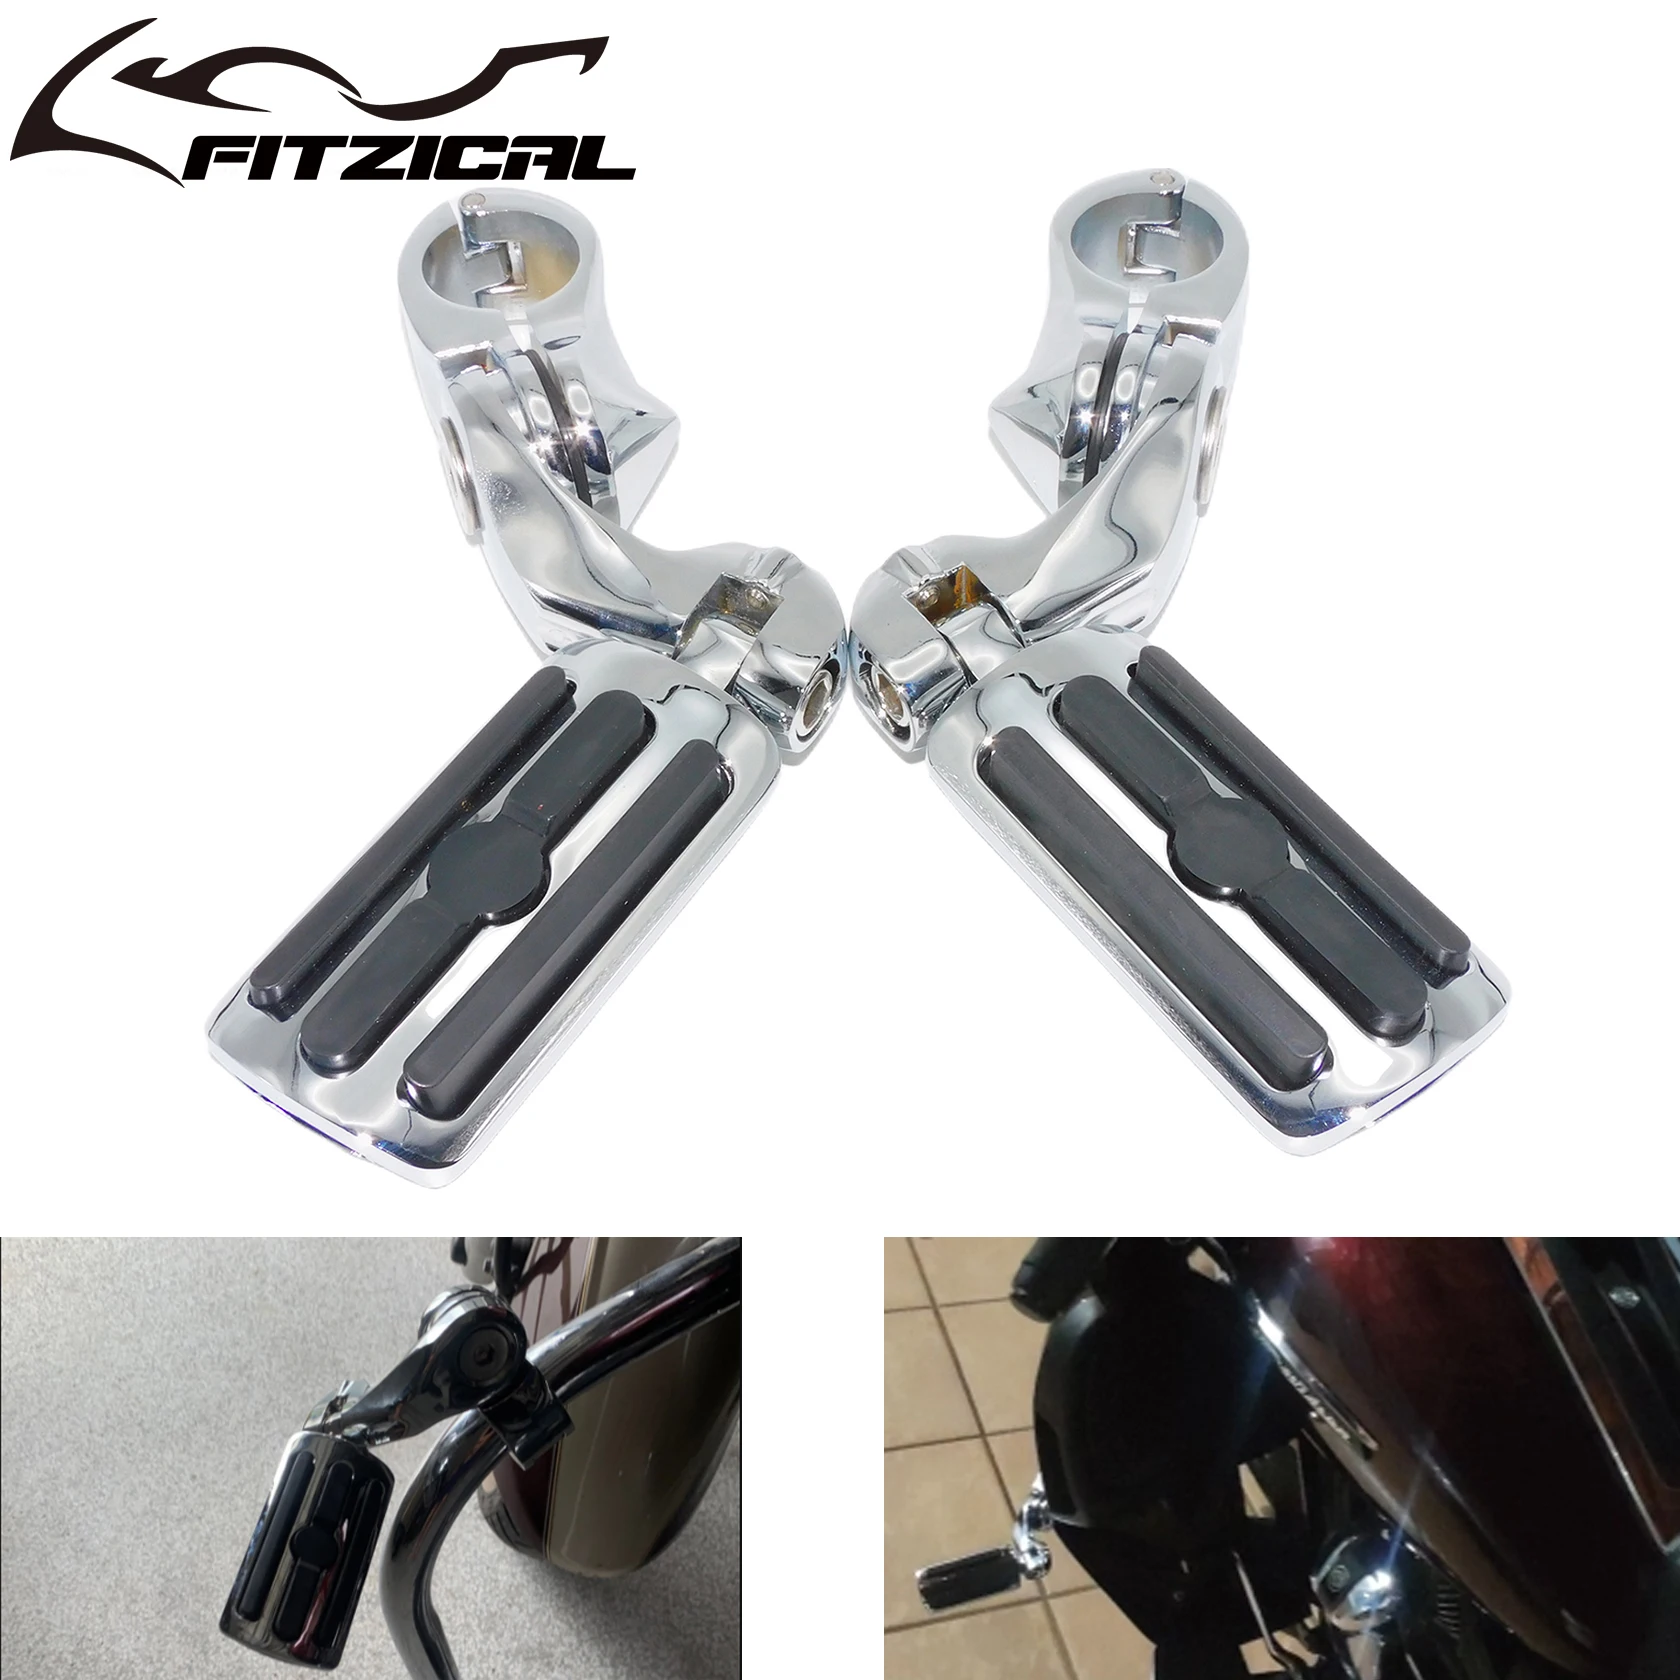 

Motorcycle Universal Short Highway Foot Pegs 1-1/4" Crash Bar Engine Guard Rest Pedal For Harley Touring Dyna Wide Glide Softail